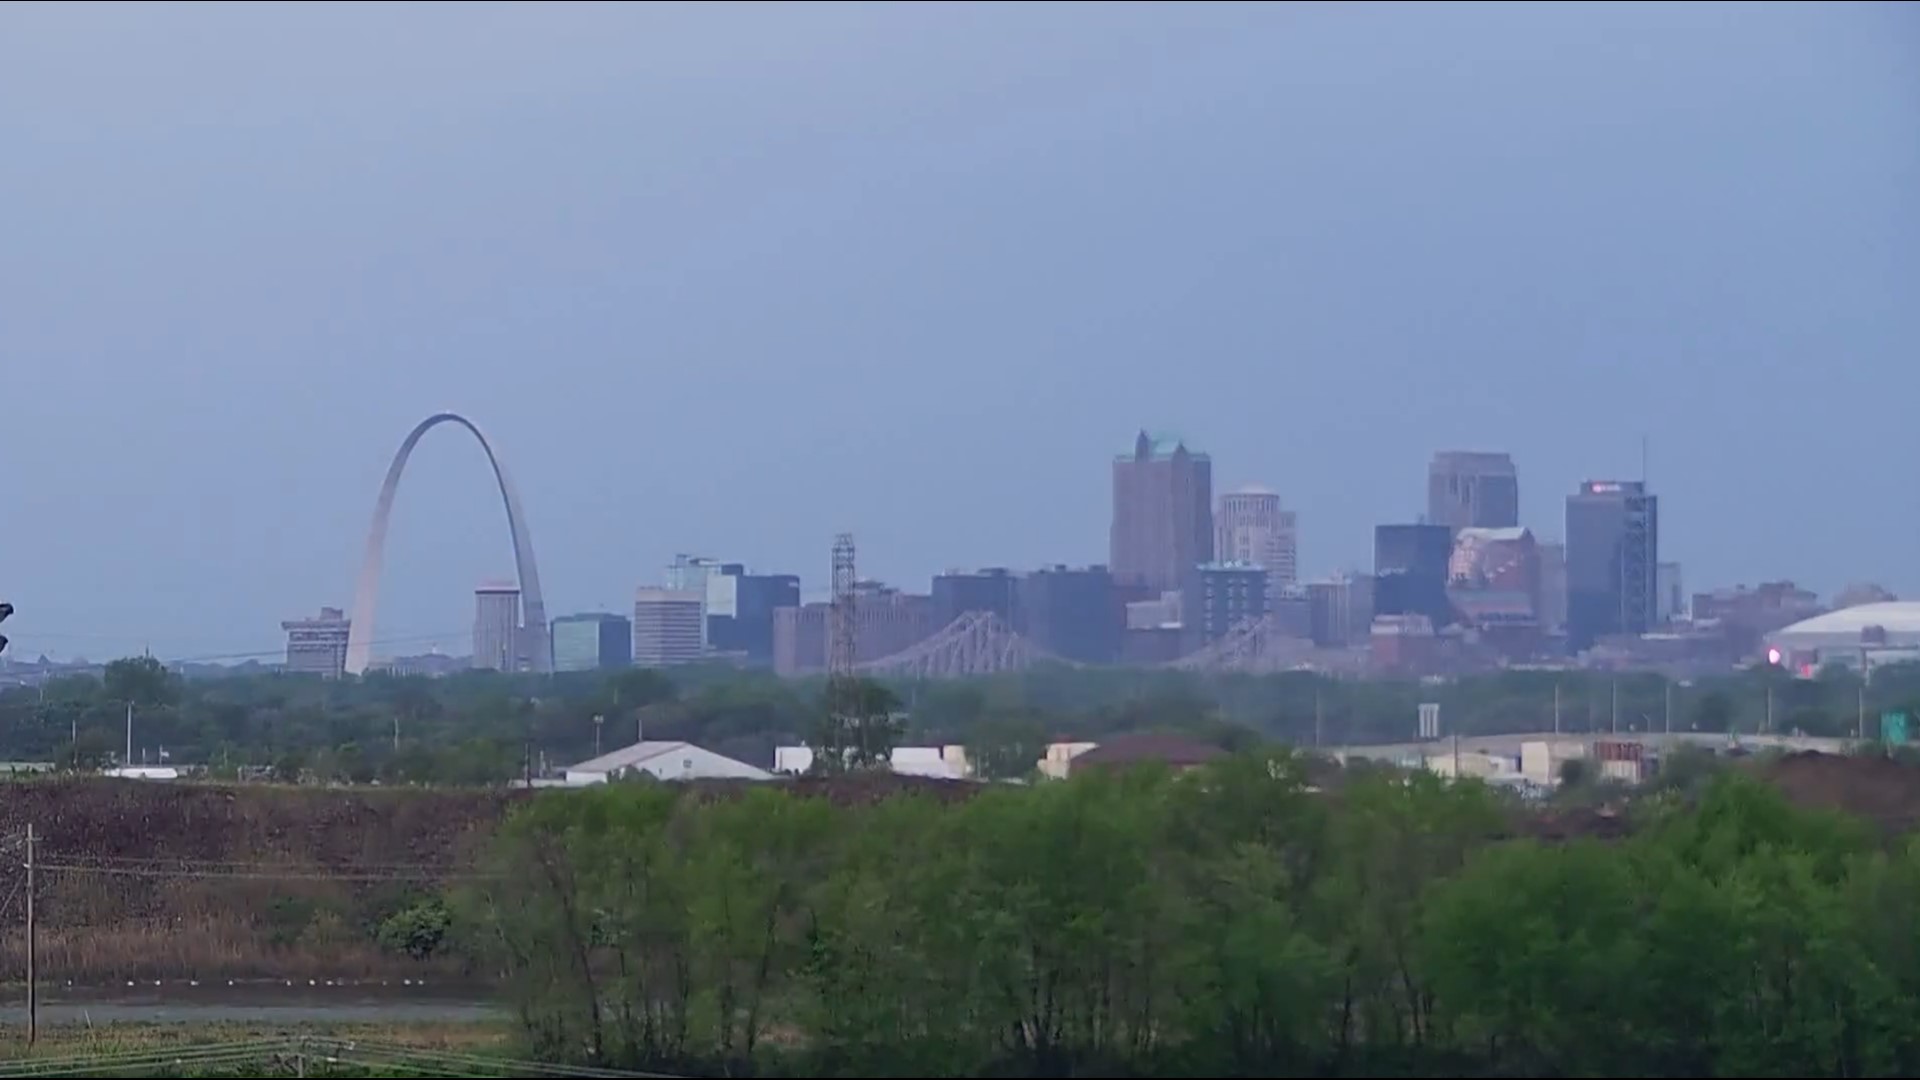 A timelapse shows the Gateway Arch and the downtown St. Louis skyline as a storm rolls through. The camera turns and shows World Wide Technology raceway.